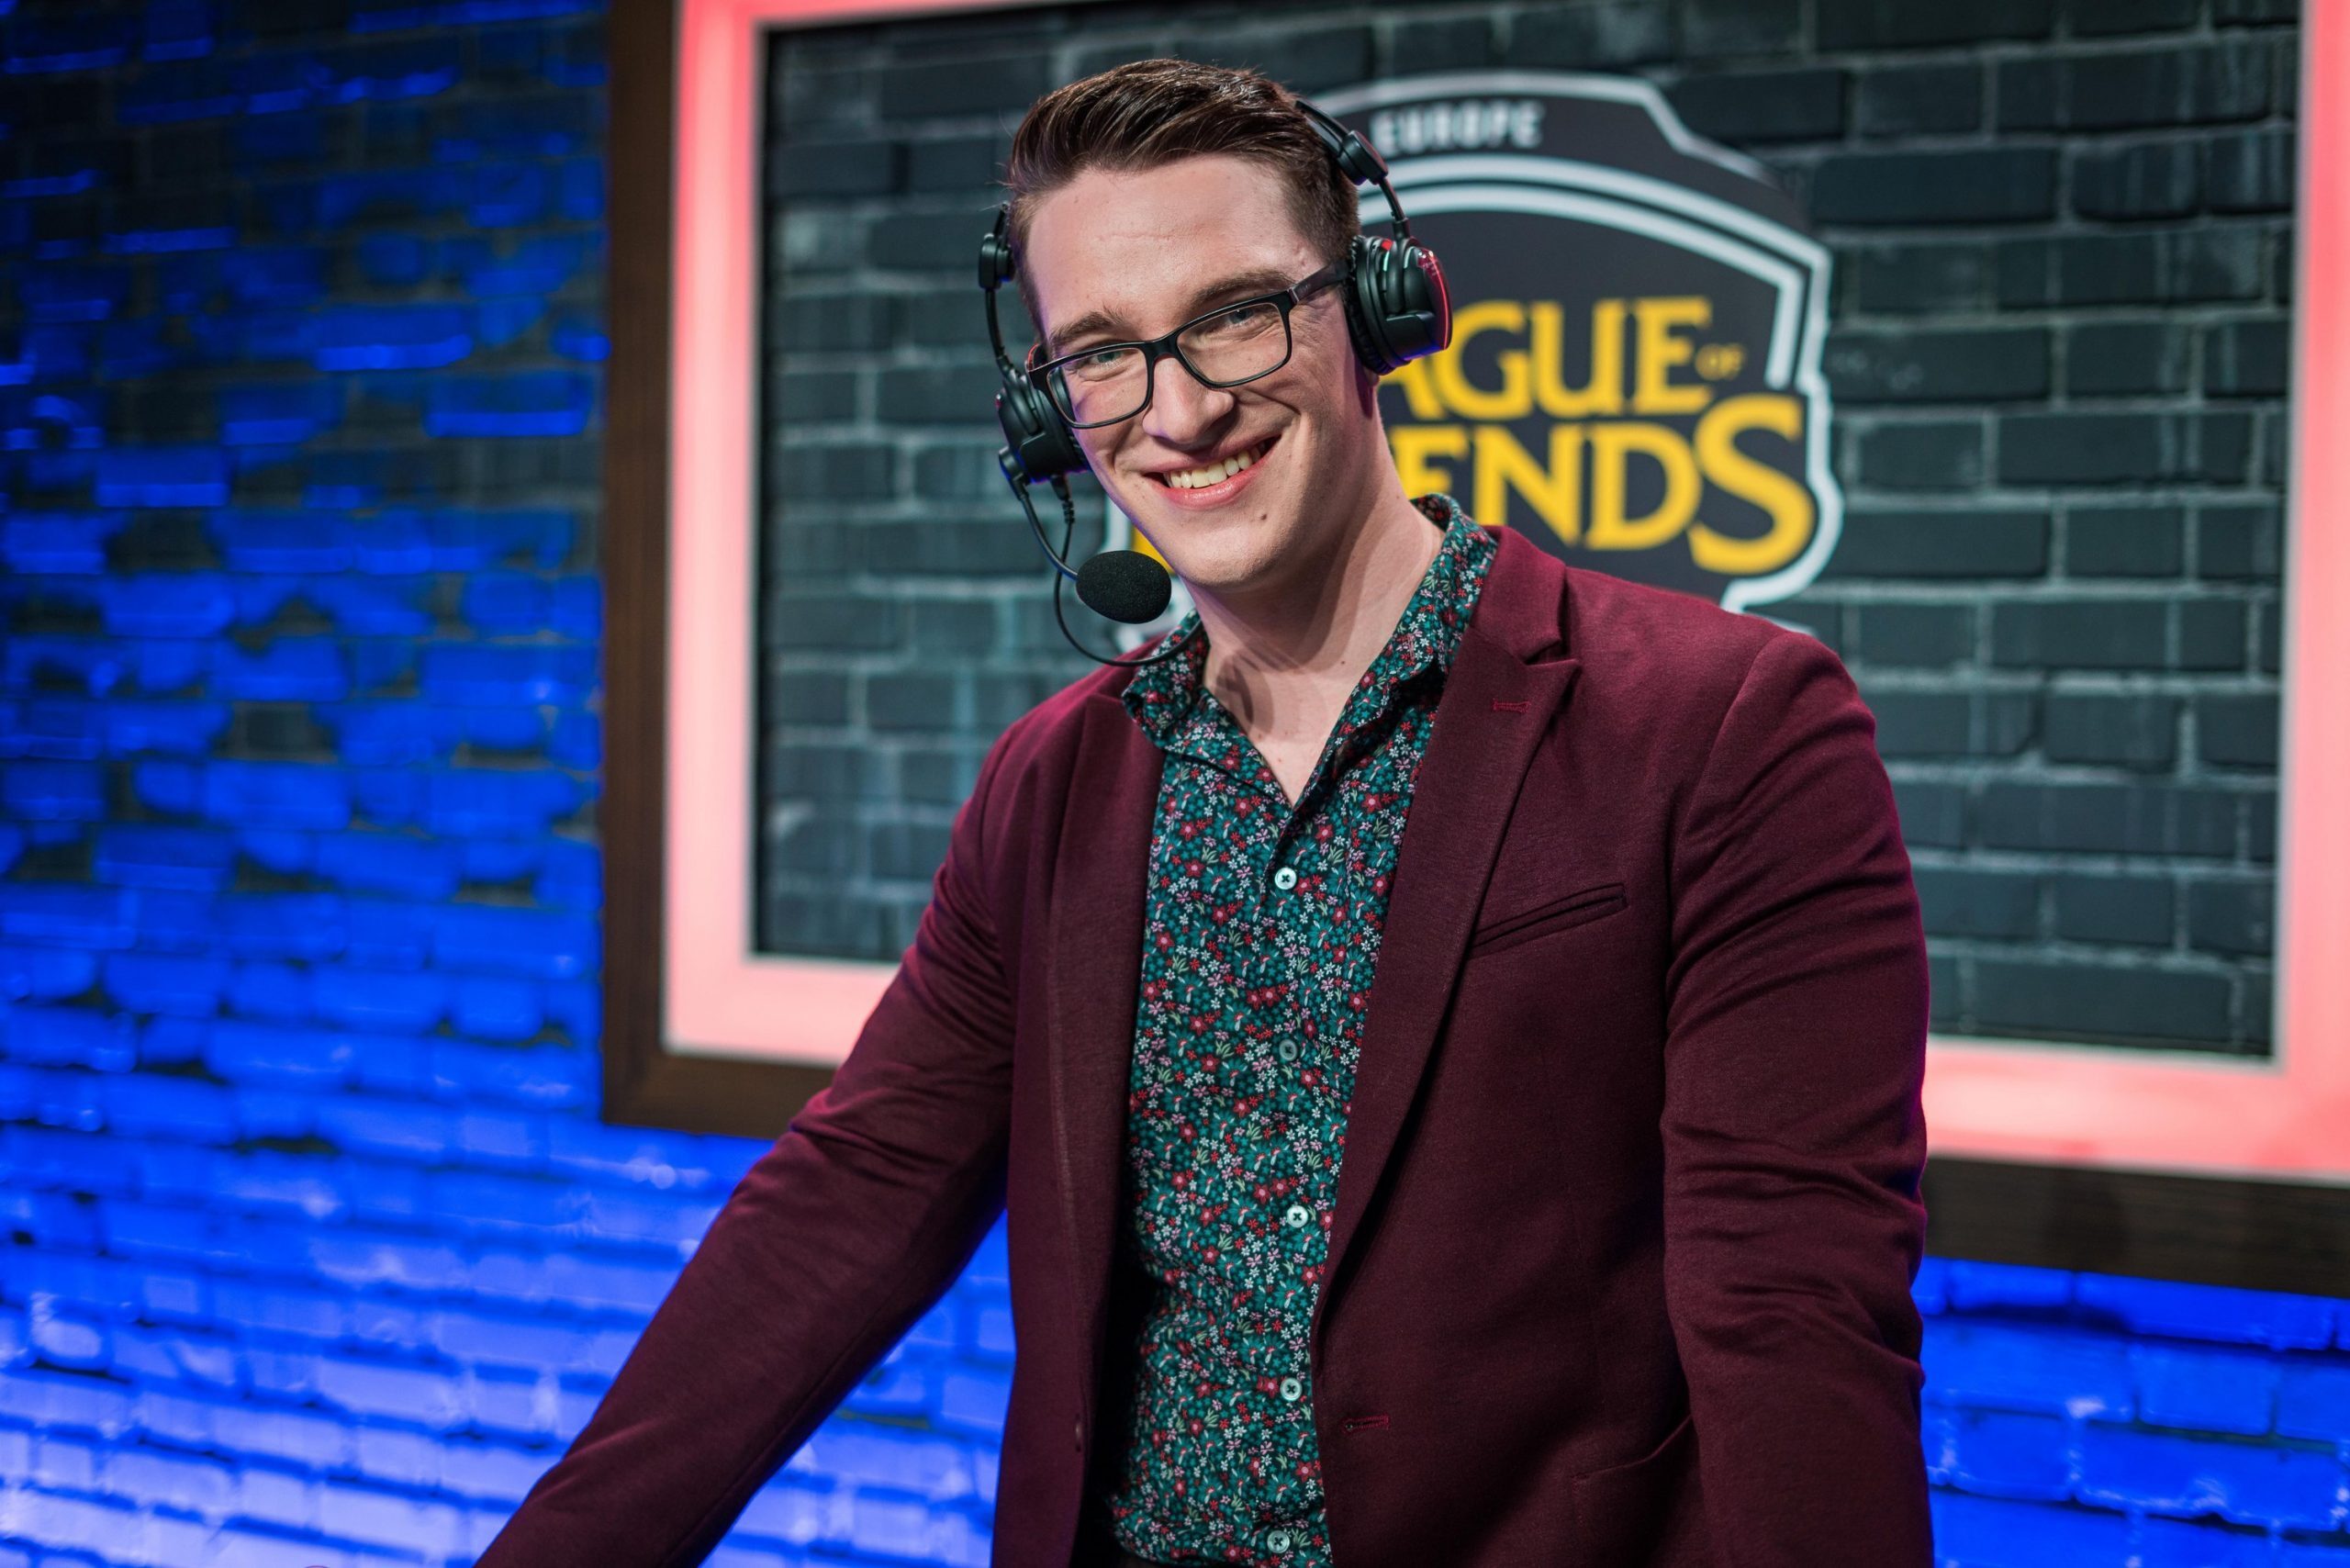 To find out if EU can win worlds, and how the franchising is going to play out, we caught up with Medic. (Photo courtesy of Riot games)